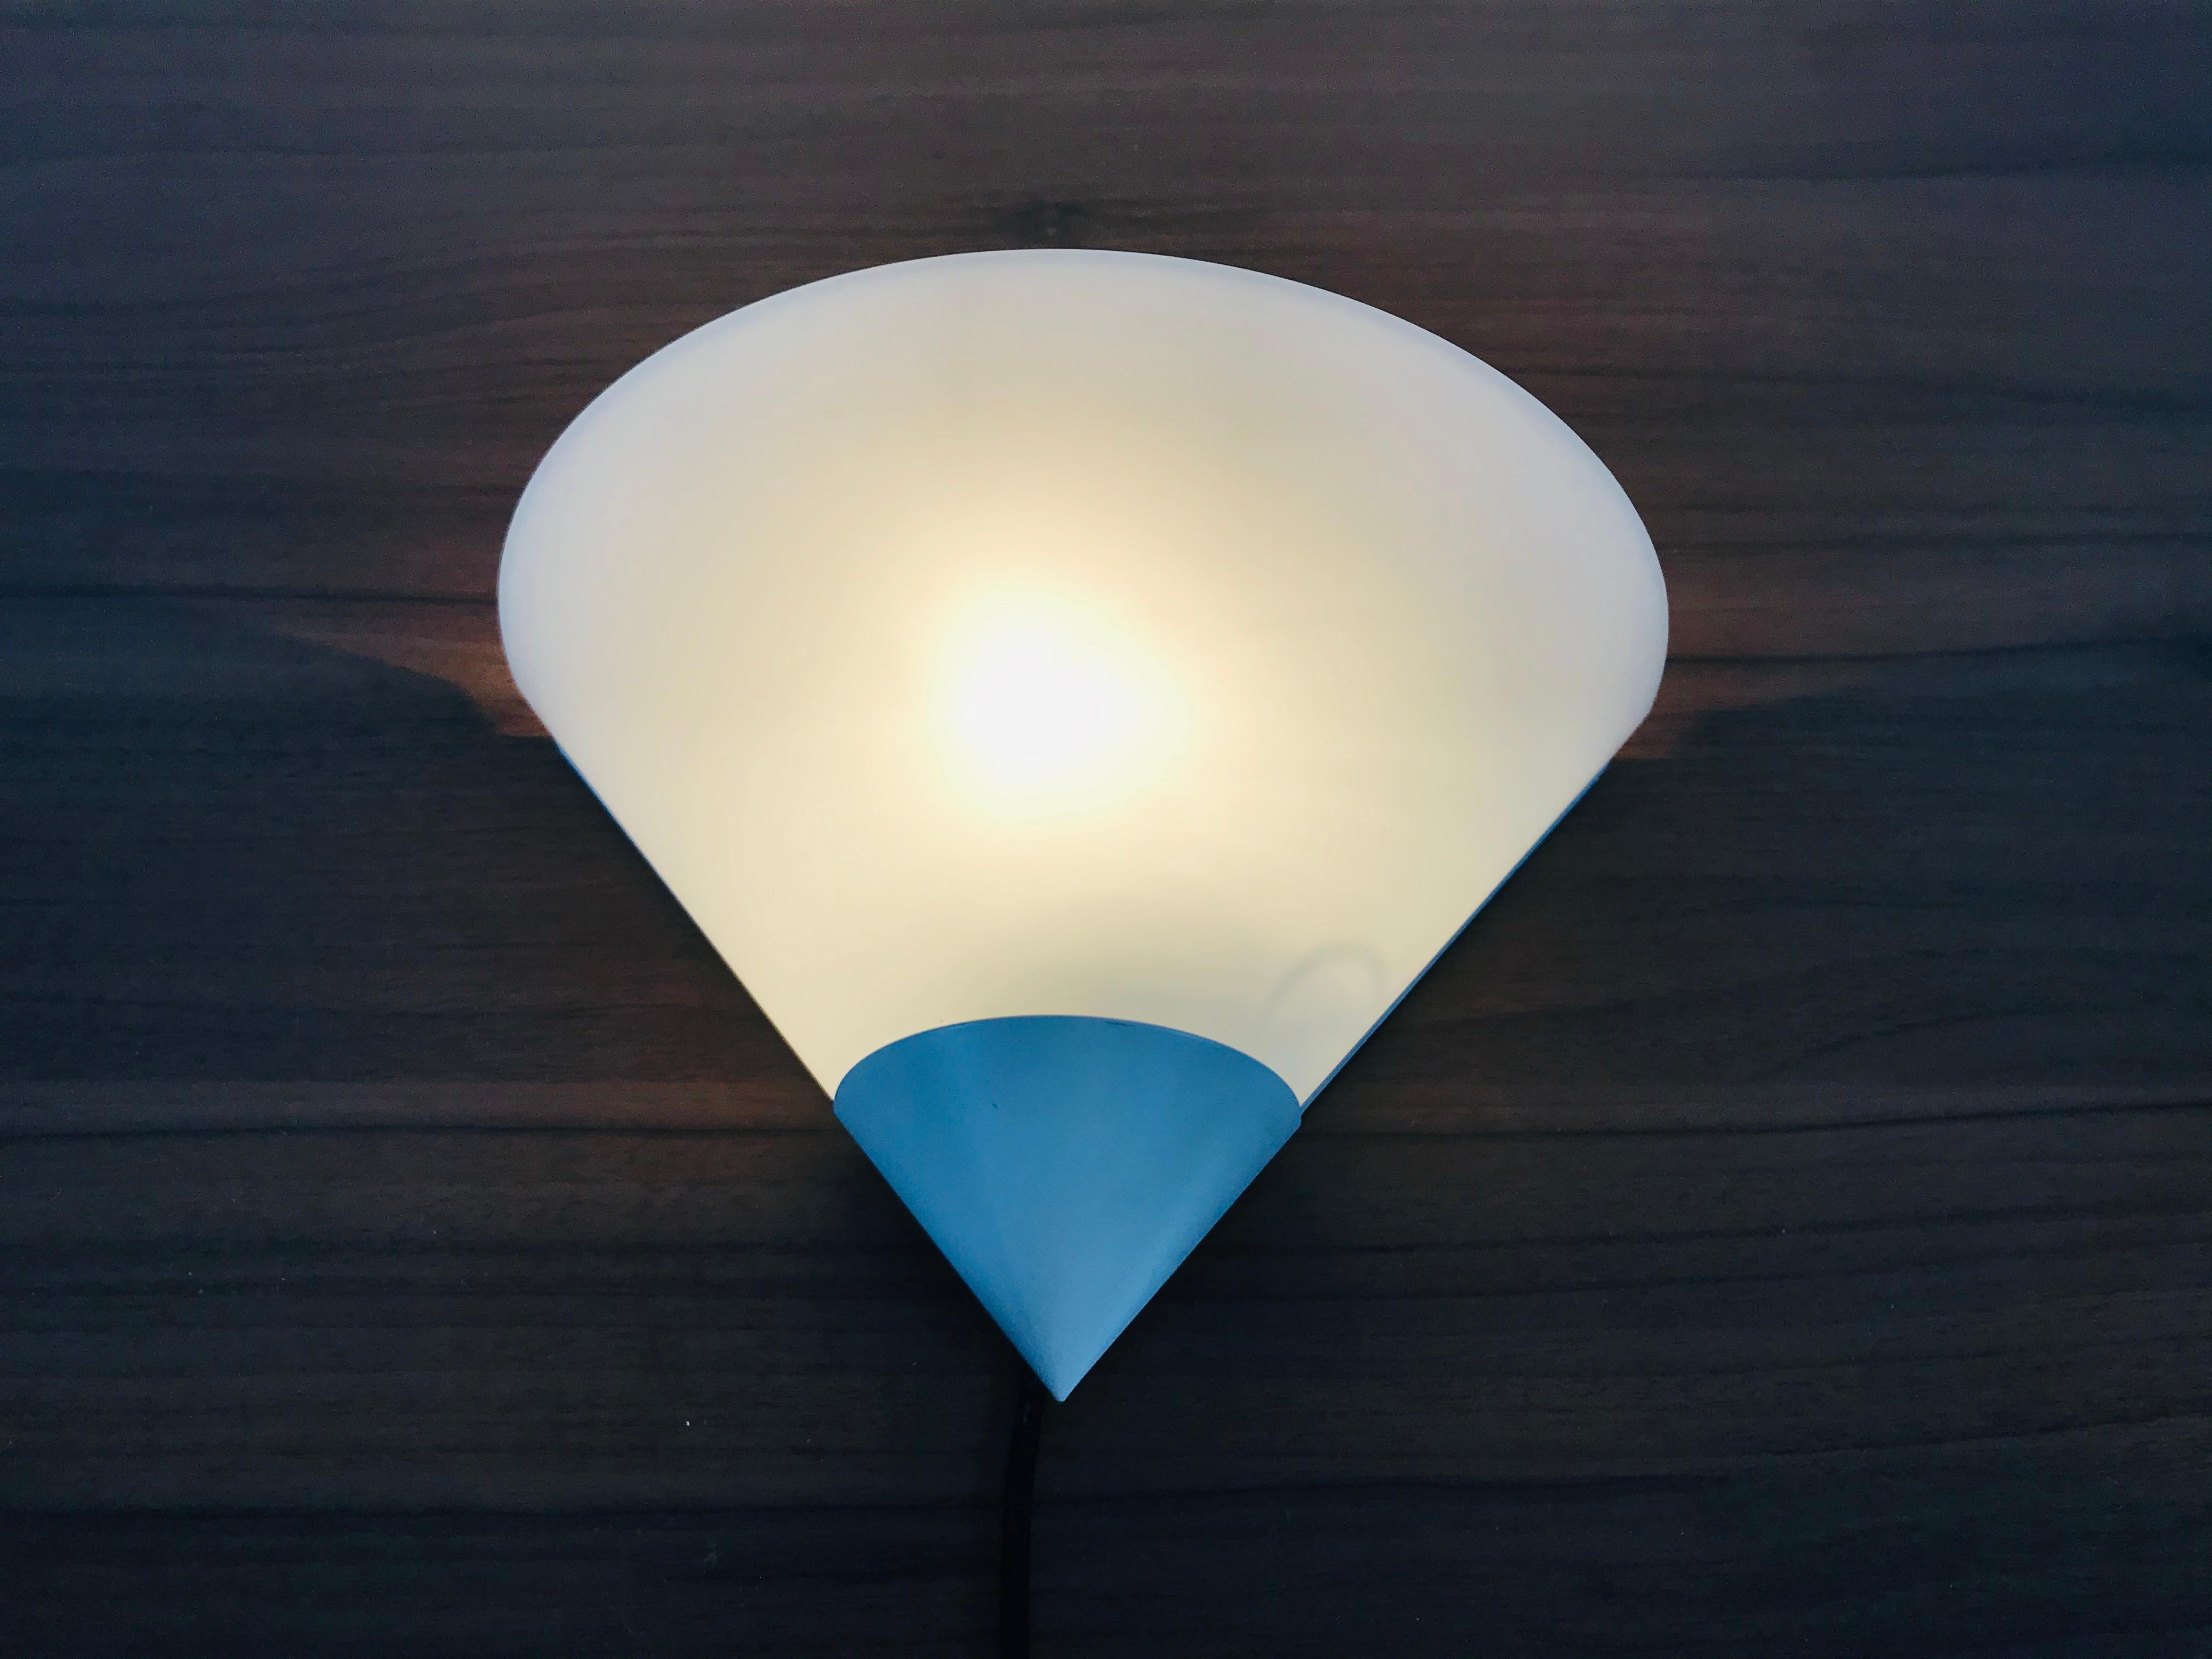 A beautiful Mid-Century Modern wall lamp by Glashütte Limburg made in Germany in the 1970s. It has a beautiful triangle shape and is made of aluminium and opaline glass. The back is white metal.

The light requires one E14 light bulb.